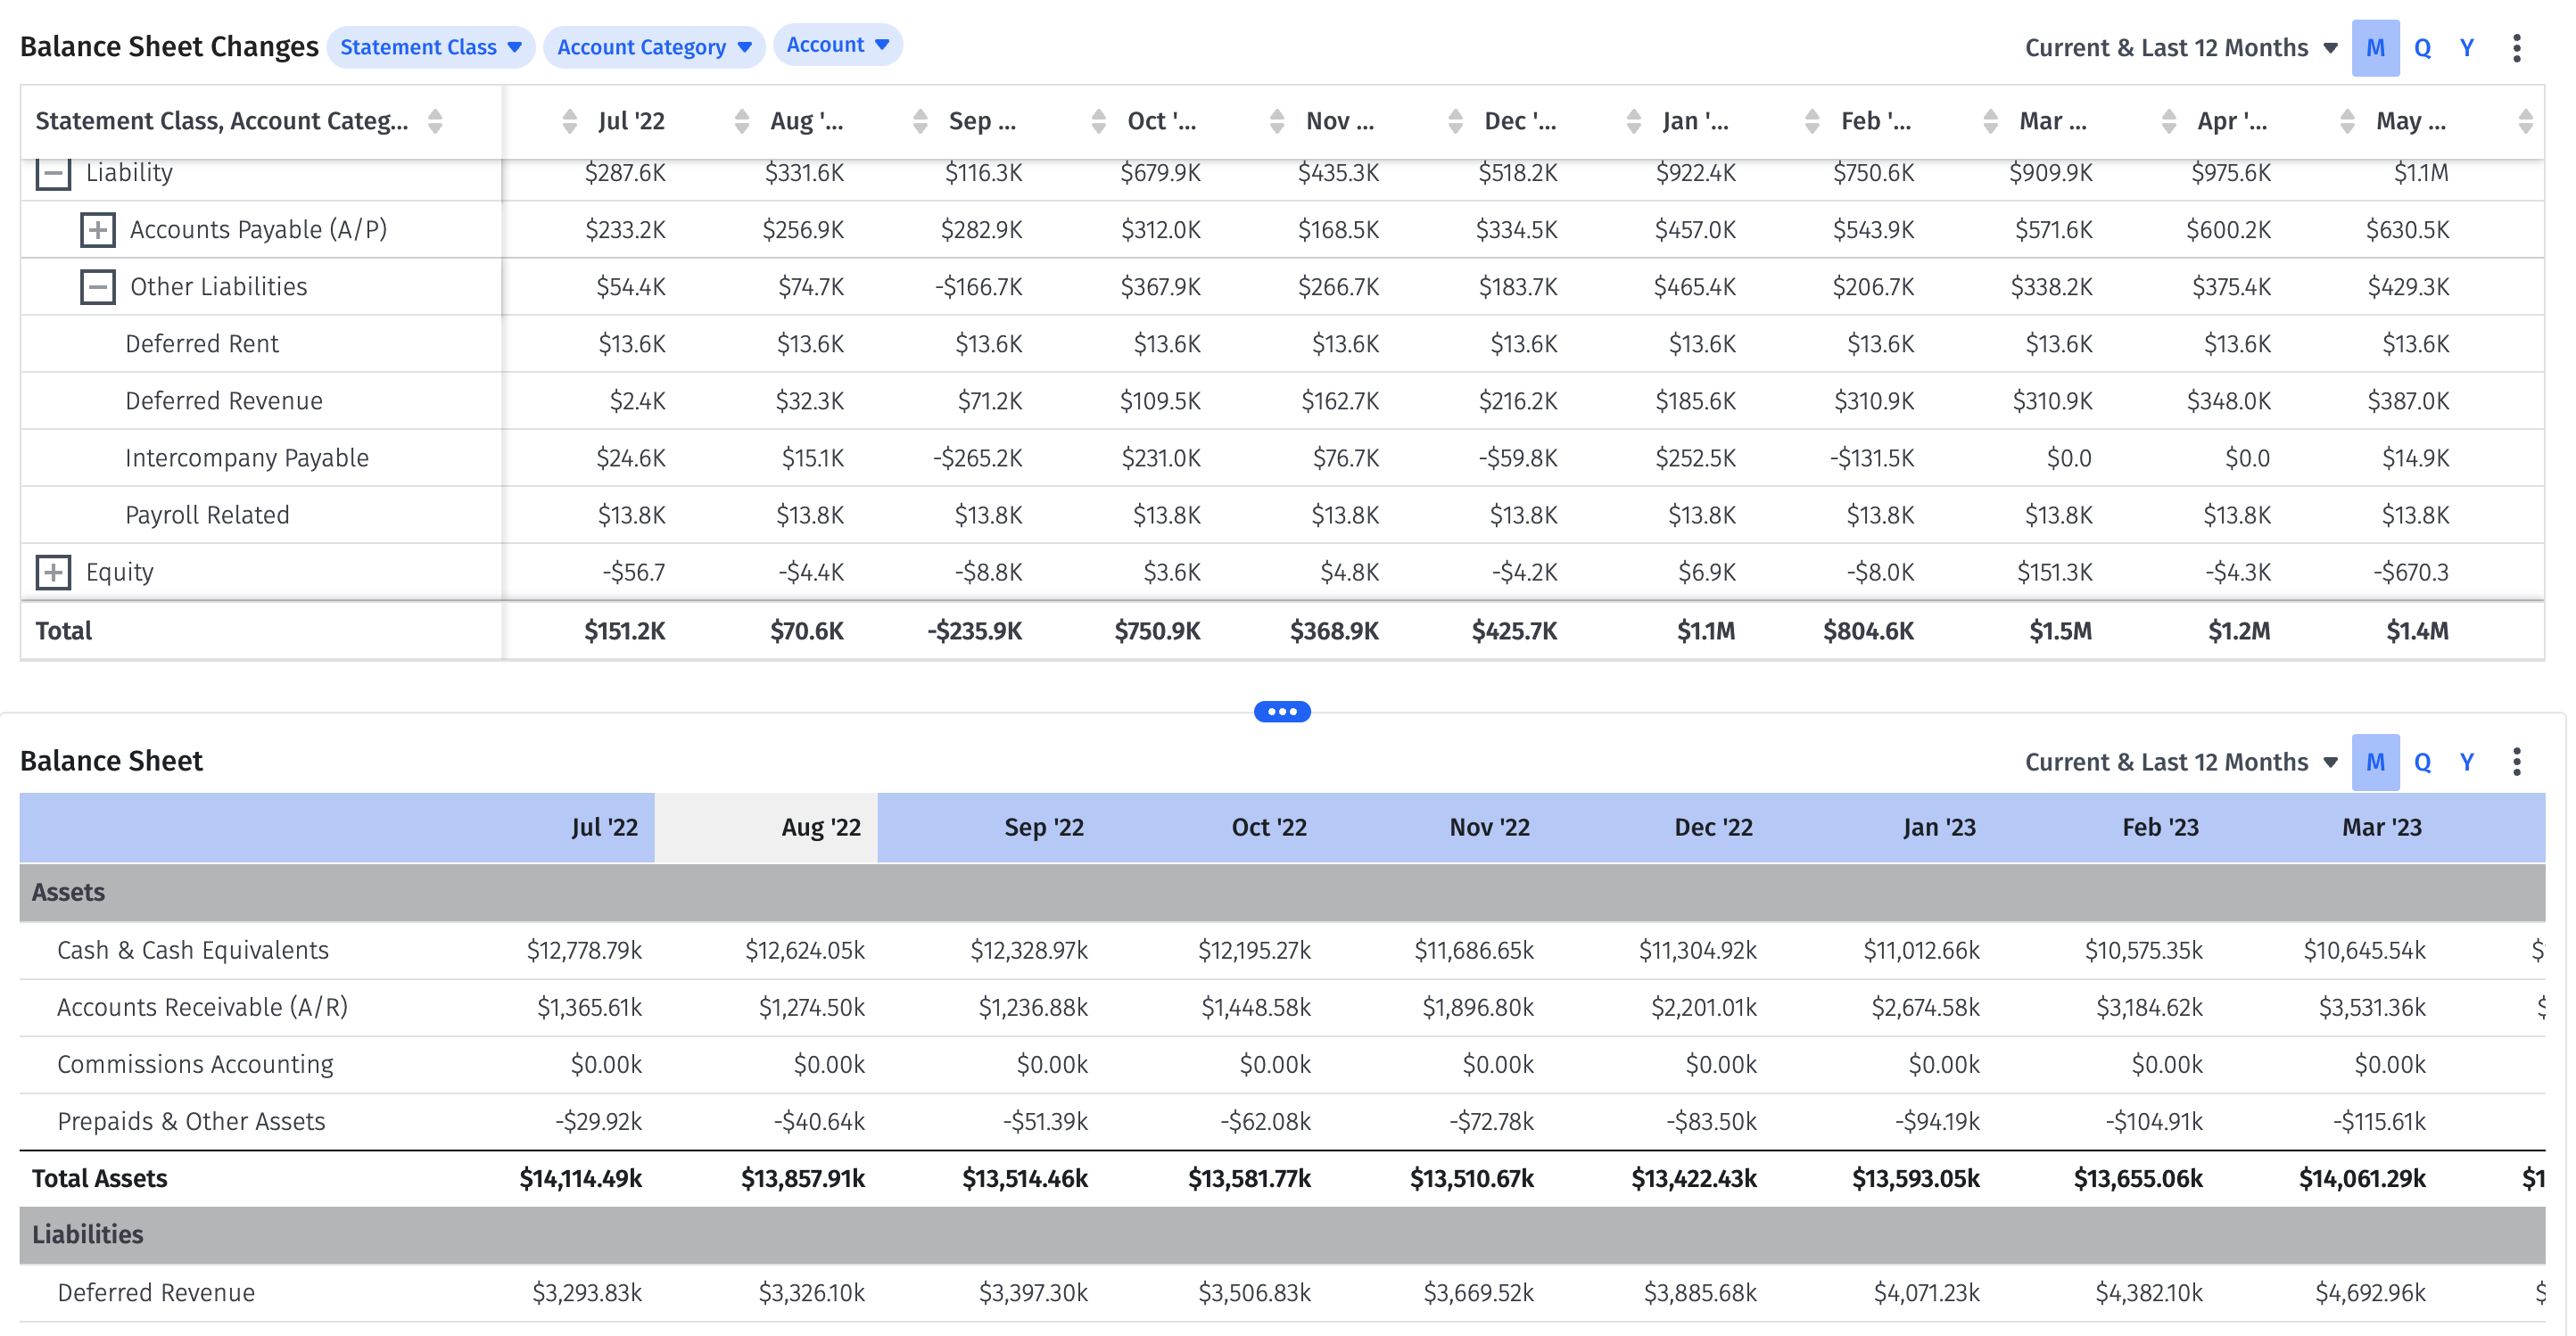 An example of a balance sheet in Mosaic showing month over month changes in liabilities and deferred revenue